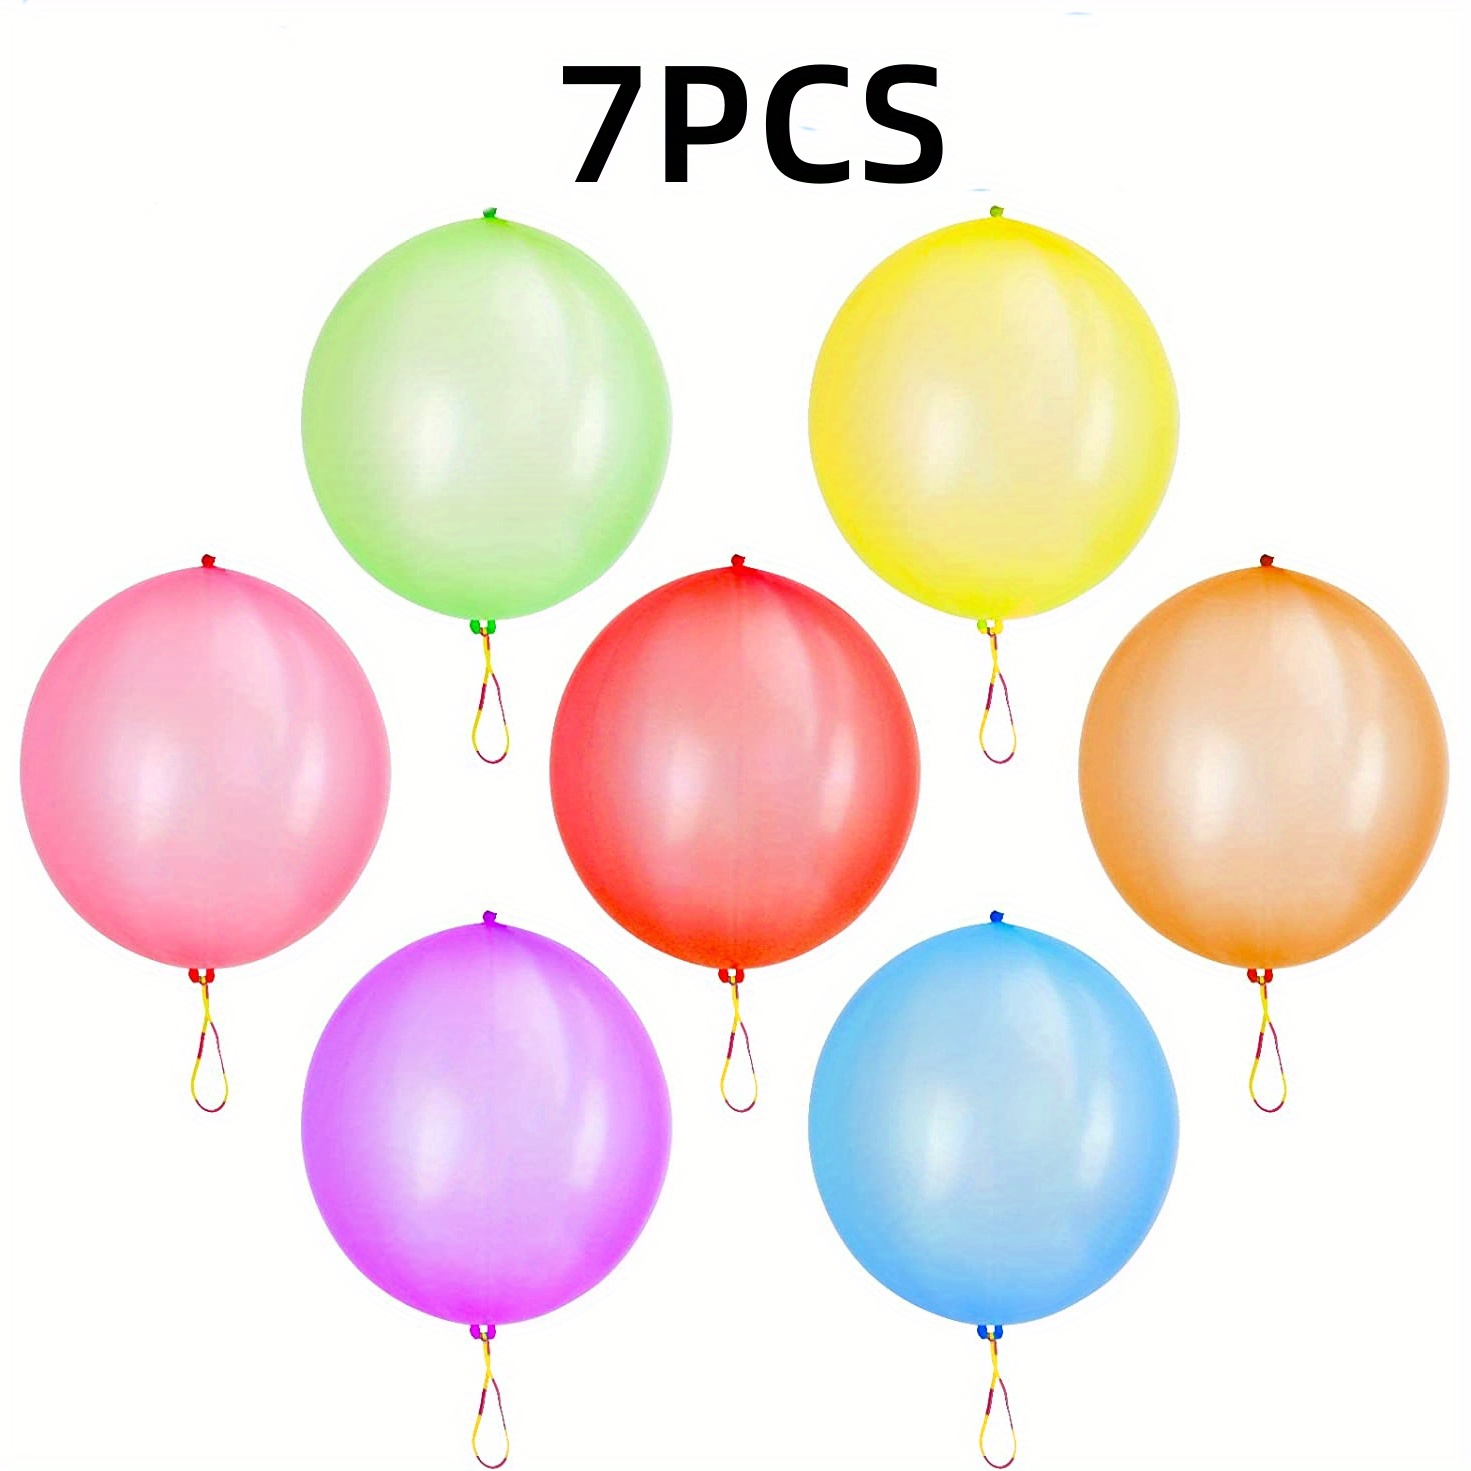 Punch Balloons in 6 Assorted Colors - 18 Inch Strong Punching Ball